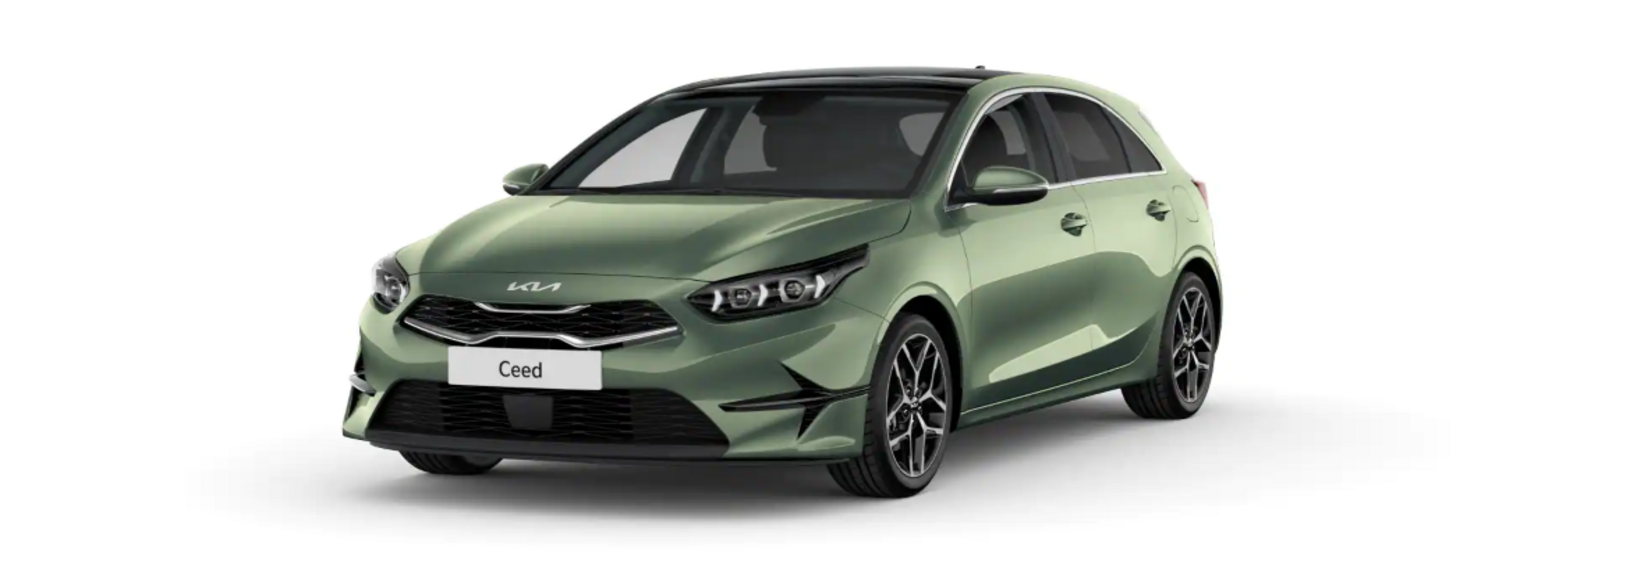 Kia Ceed 1.0 T-GDi 100PS Edition 7 | Privatleasing-Aktion